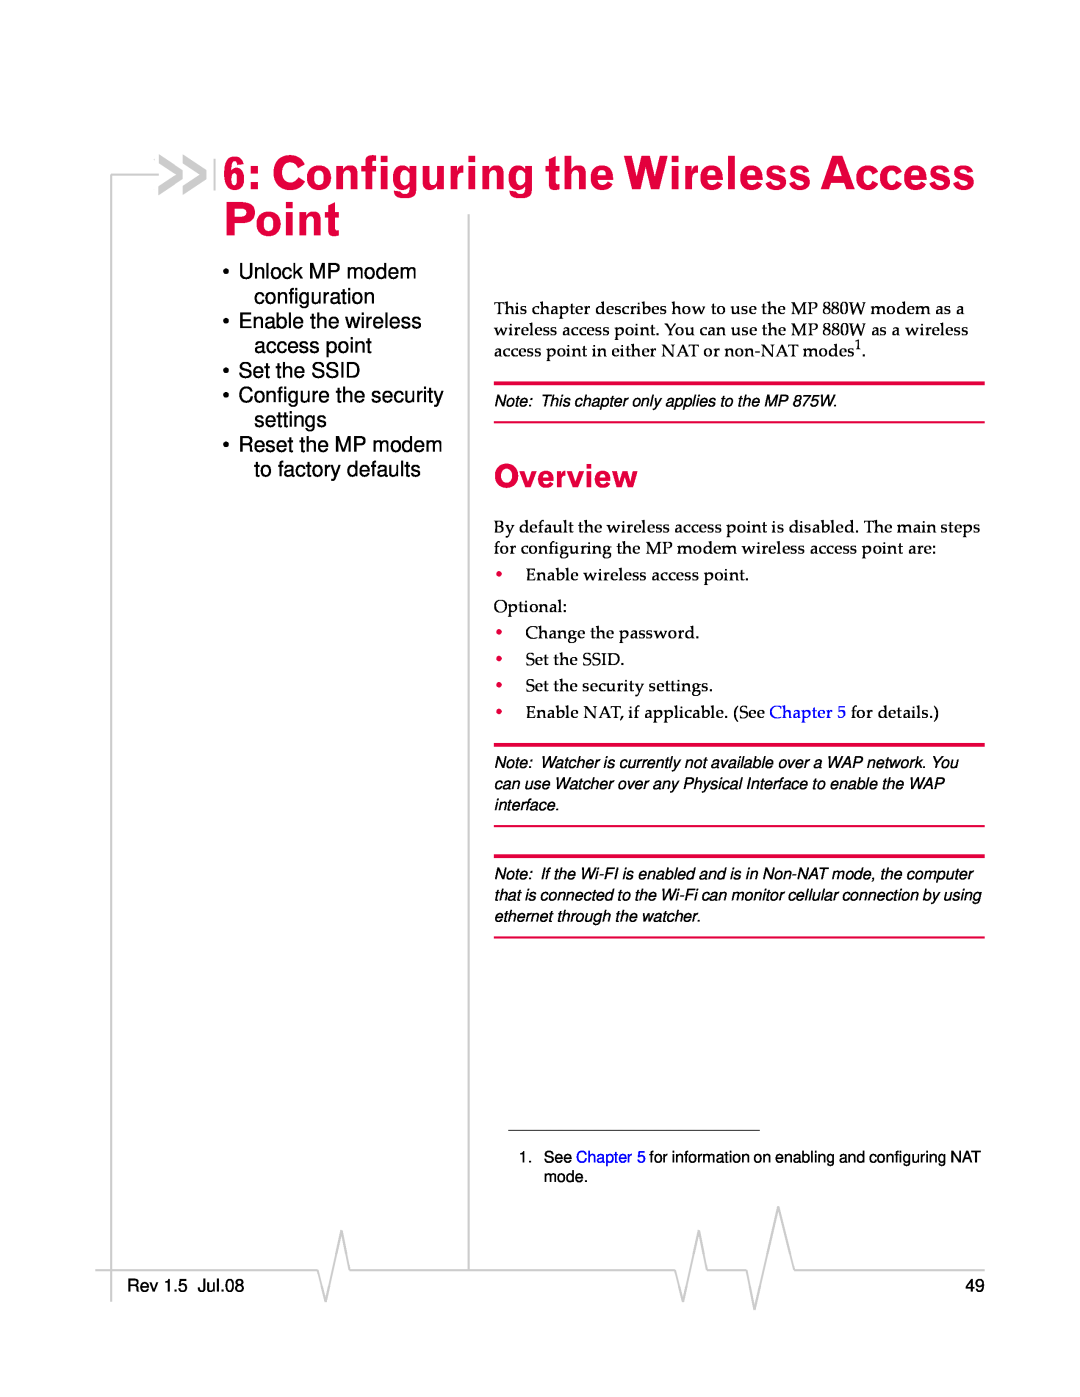 Sierra Wireless MP 880W manual Configuring the Wireless Access Point, Overview 